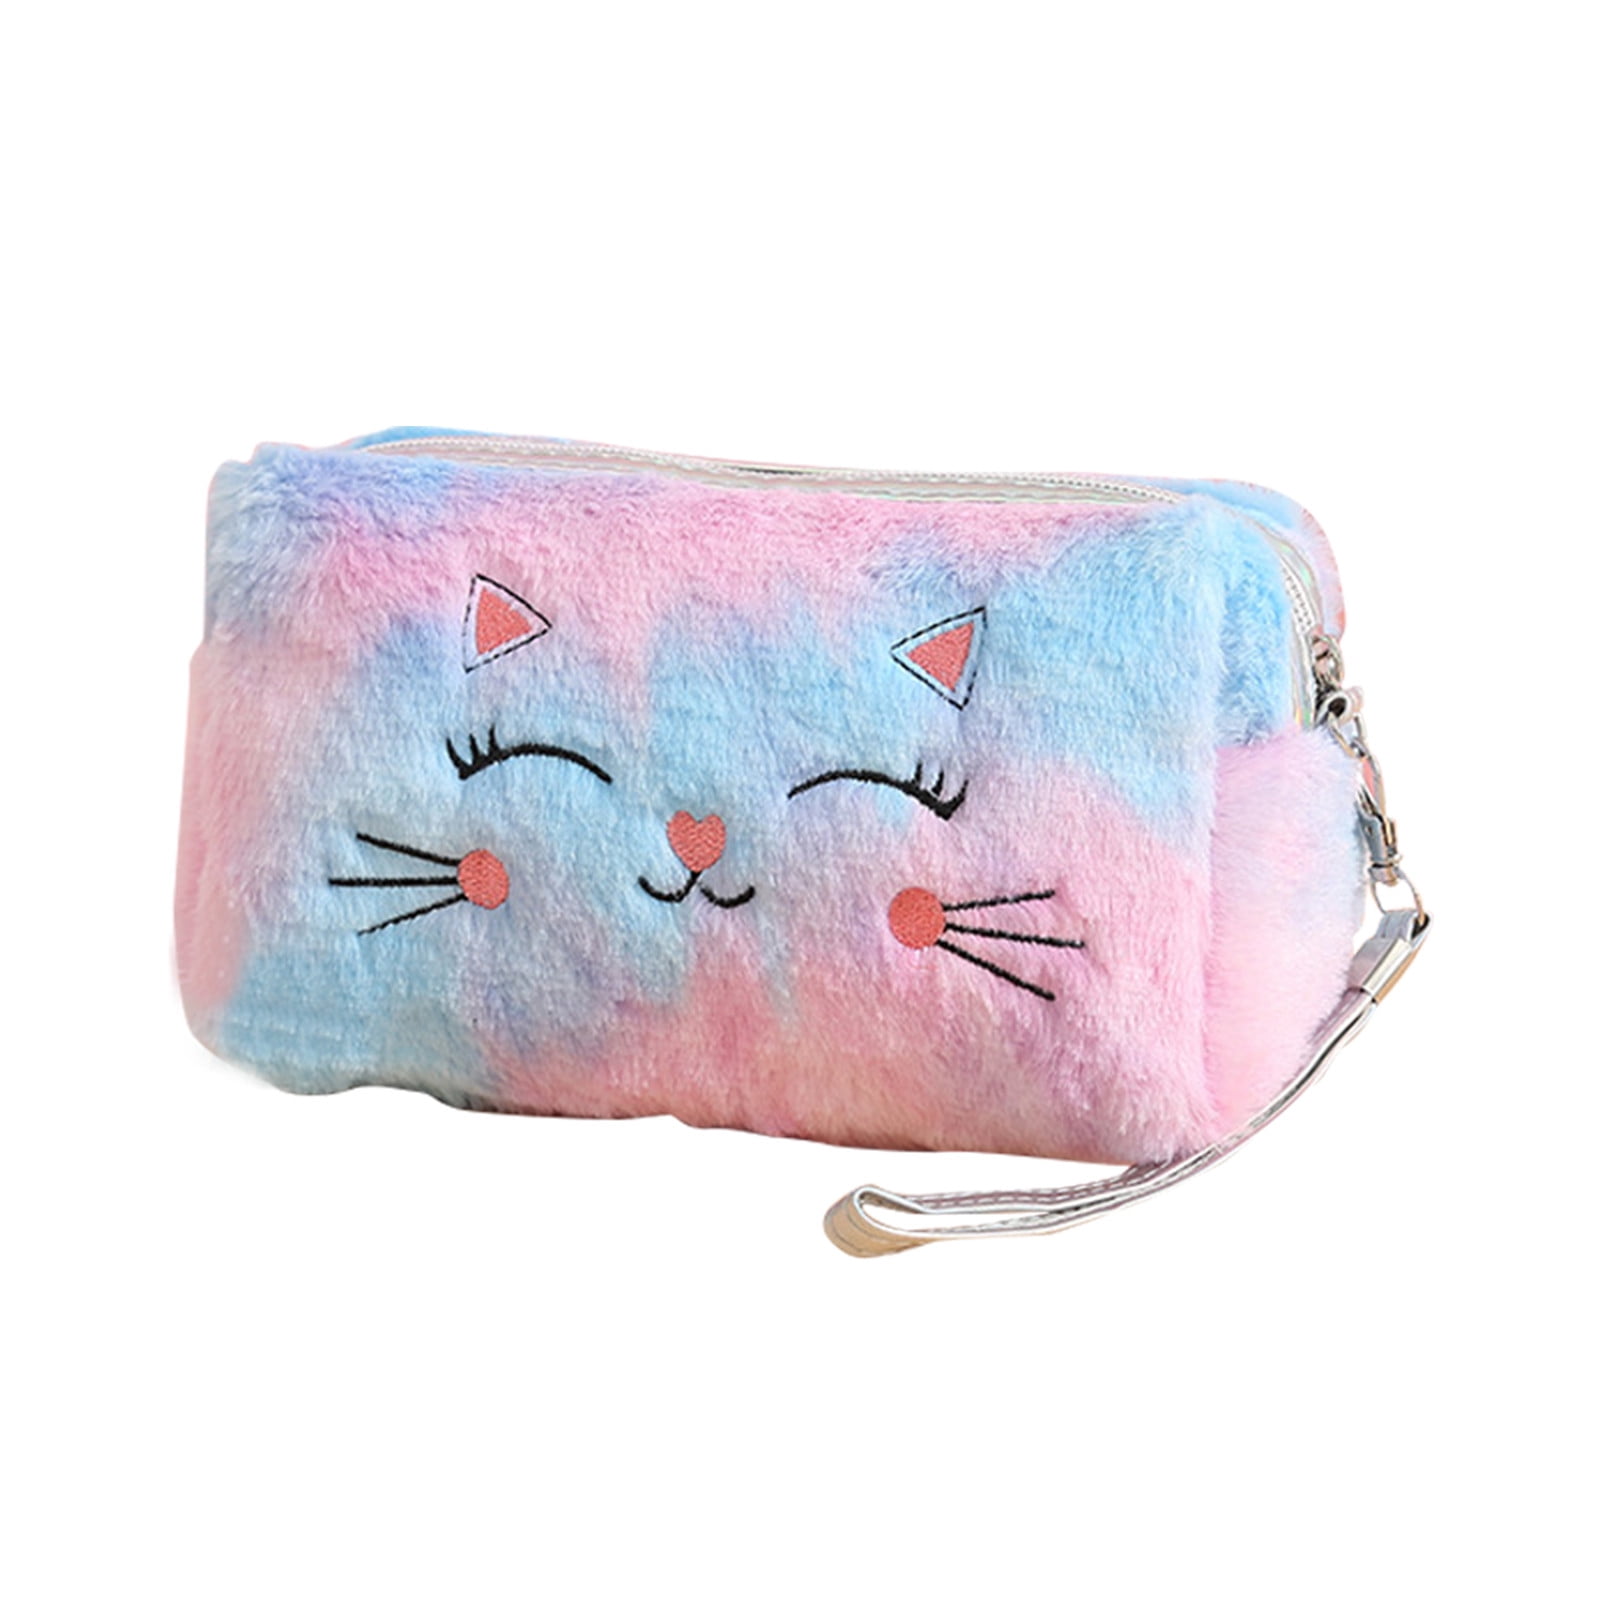 Pusheen Pencil Pouch / Cosmetic Make Up Bag Zippered Case Cute Cat Pink  NEW!